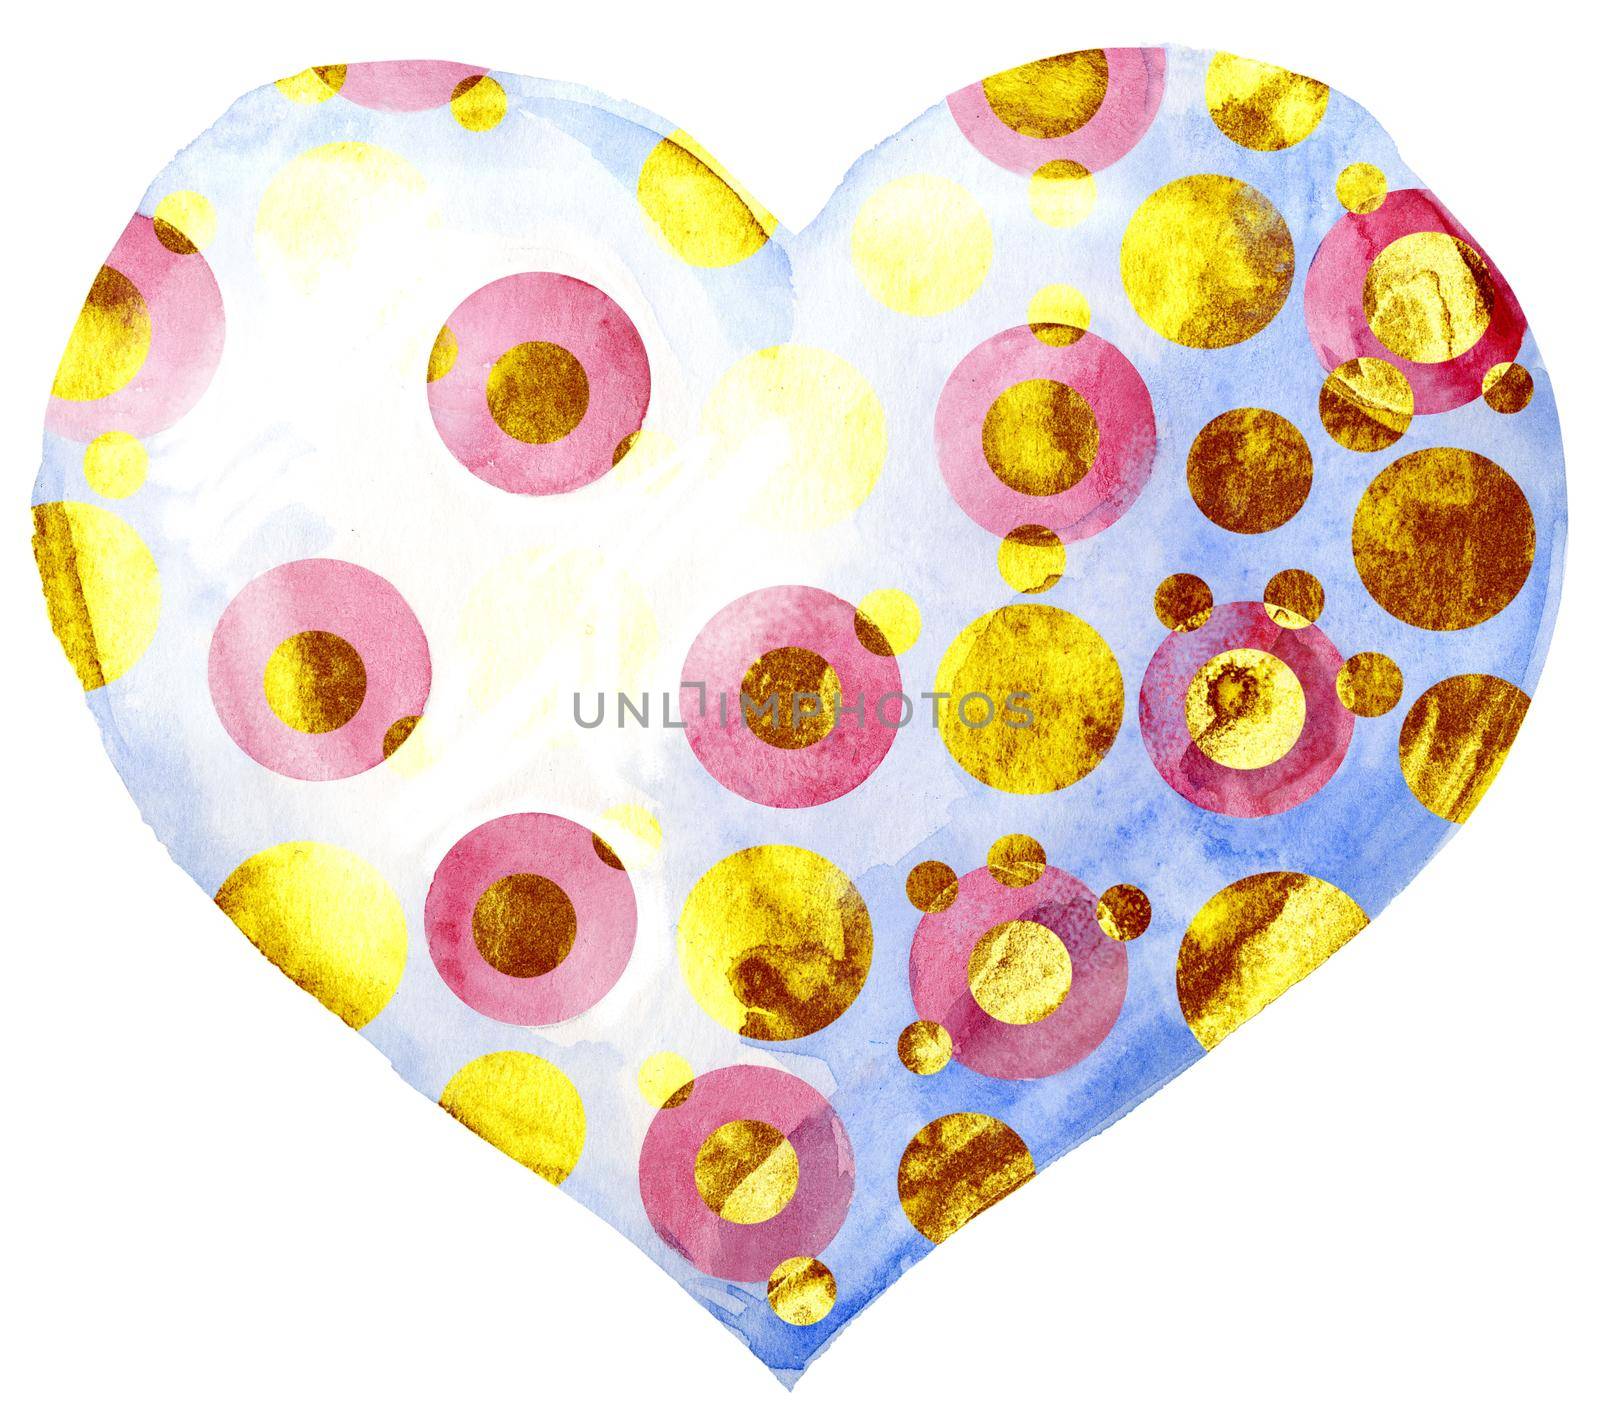 Watercolor white heart with gold dots on white background by NataOmsk